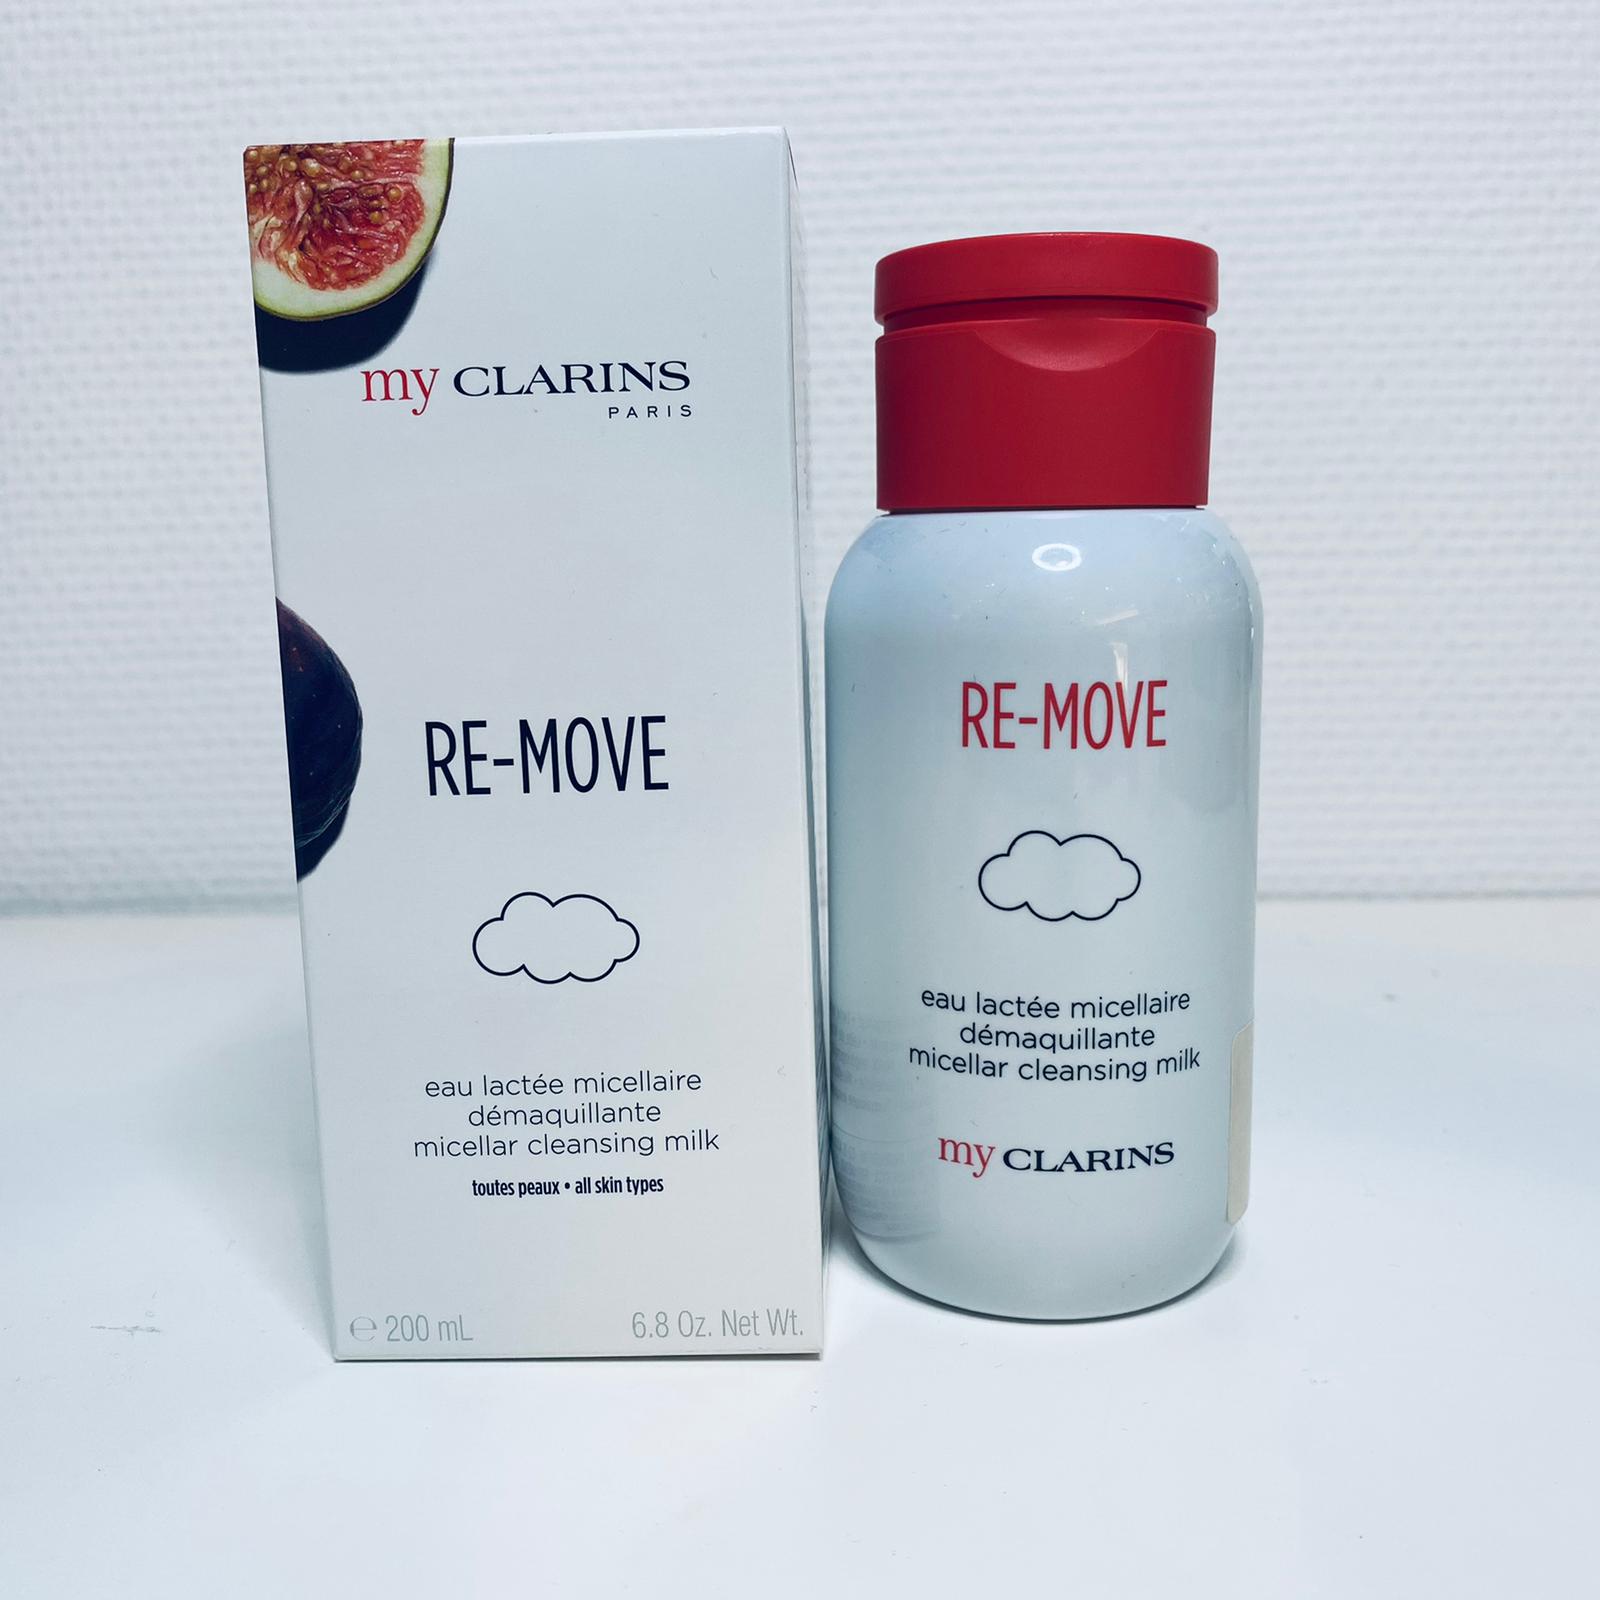 My clarins re-move micellar cleansing milk all skin types 200 ml